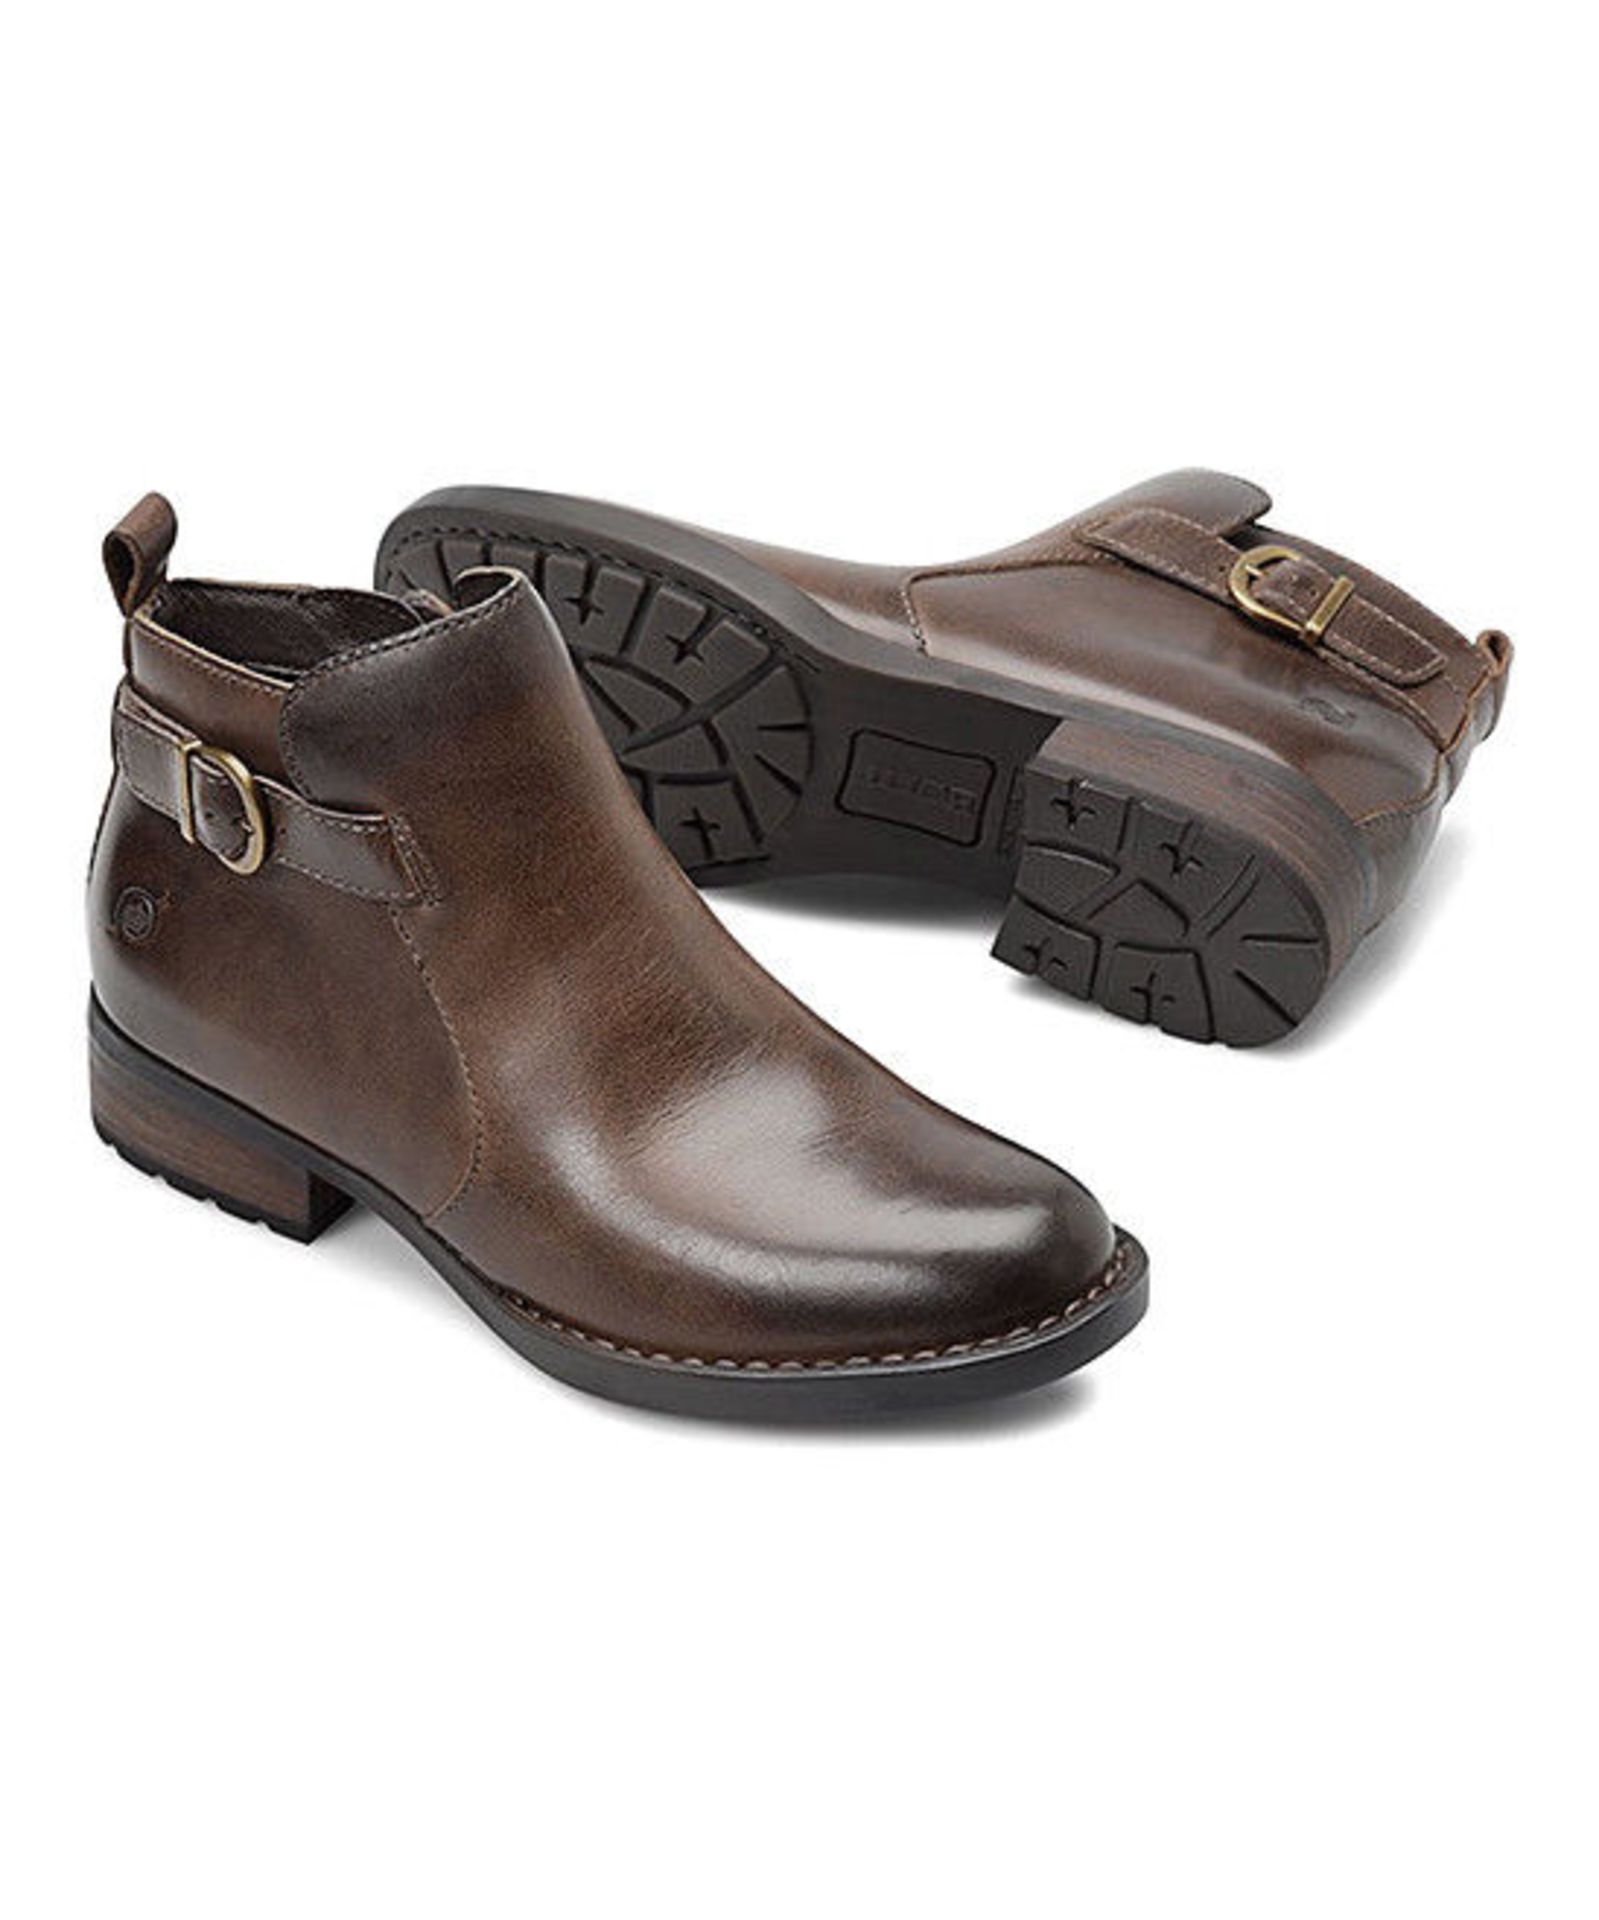 Børn Brown Timms Leather Bootie (Uk Size:7.5/Us Size:10) (New With Box) [Ref: 55334204-K-004]